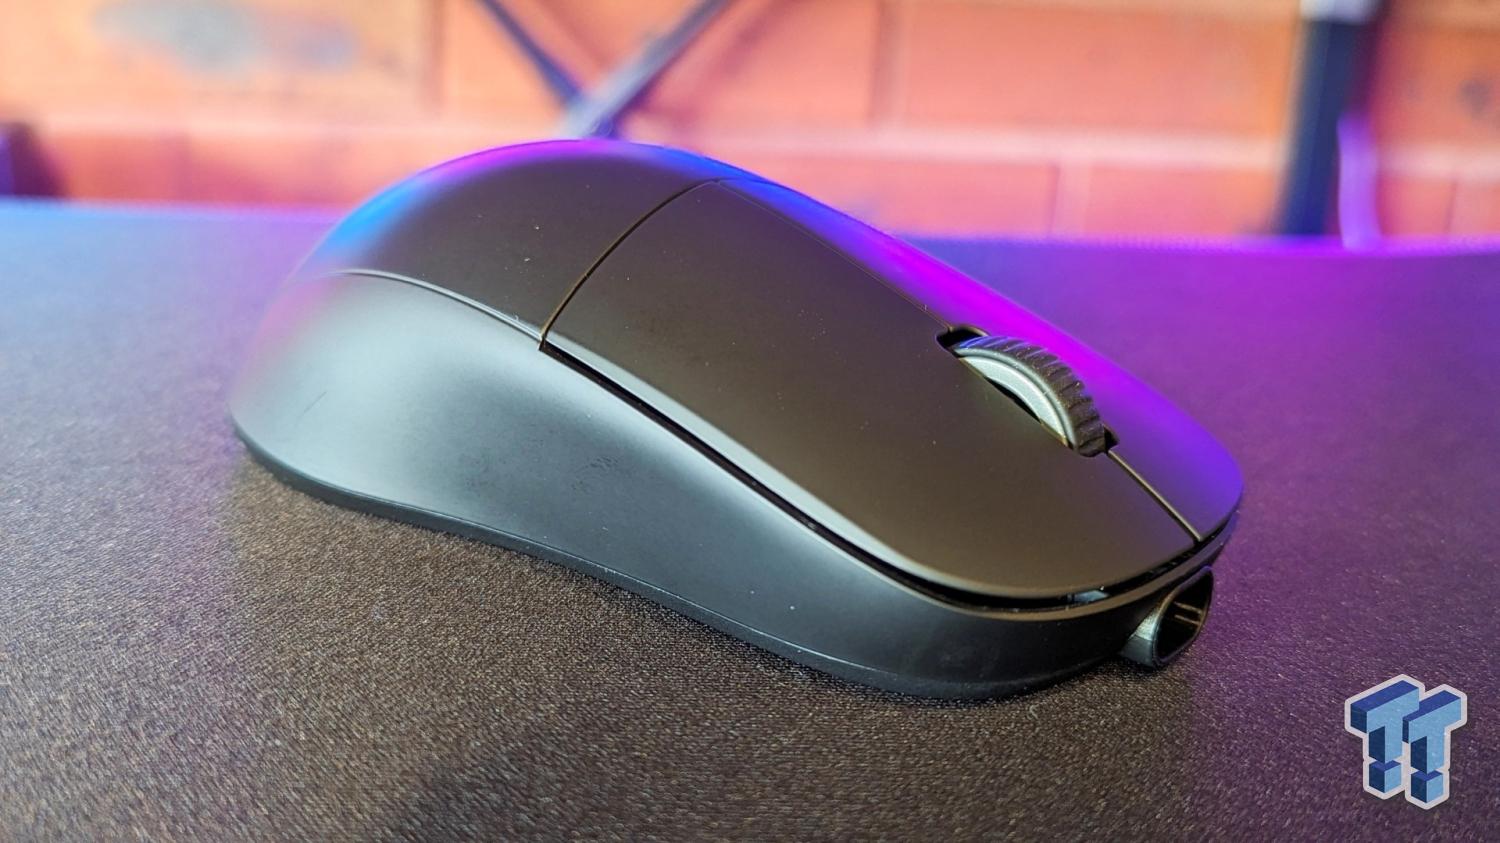 EndGame Gear XM2we Wireless Gaming Mouse Review